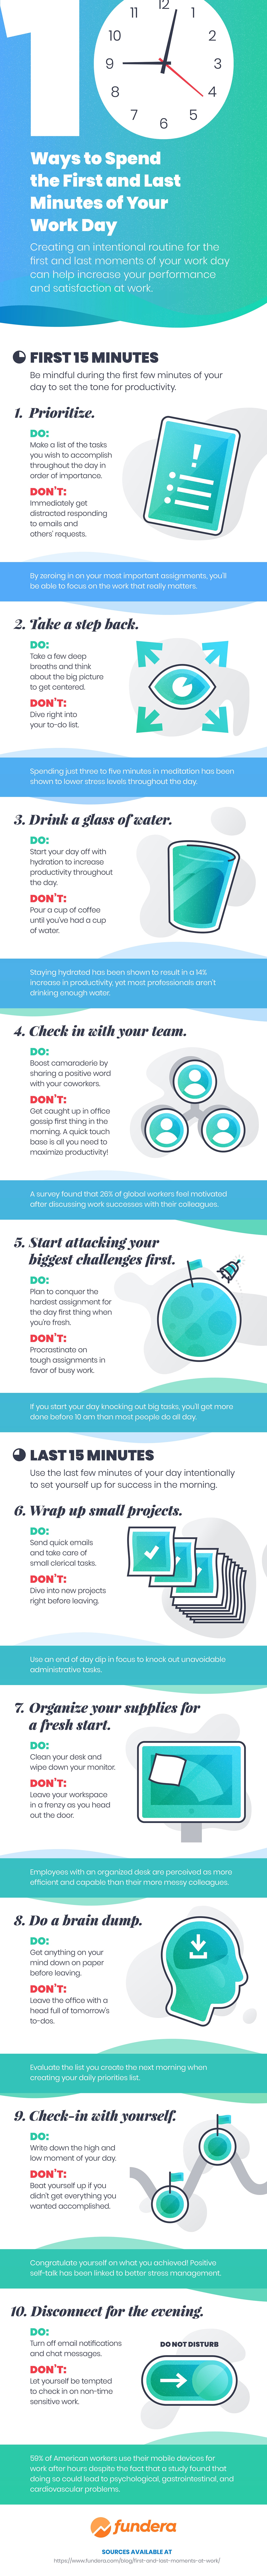 The Best Ways to Start and End Your Workday [Infographic]